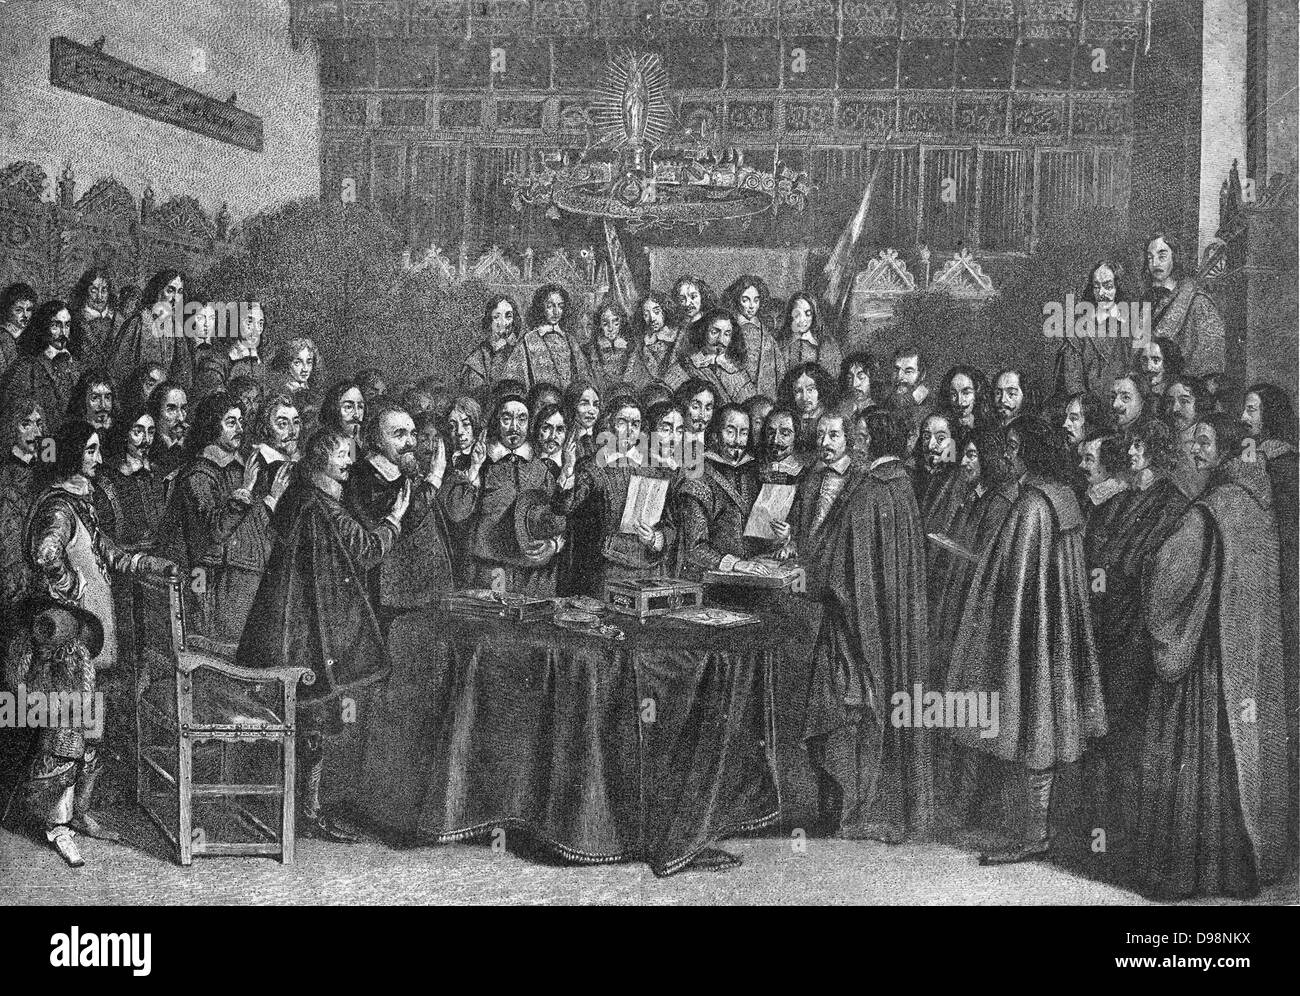 The Peace of Westphalia, 30th January 1648 ended the War of Octogenarians.  The Dutch Republic was considered to be an independent state.  the great hall of the Munster Town Hall on that memorable day. Stock Photo